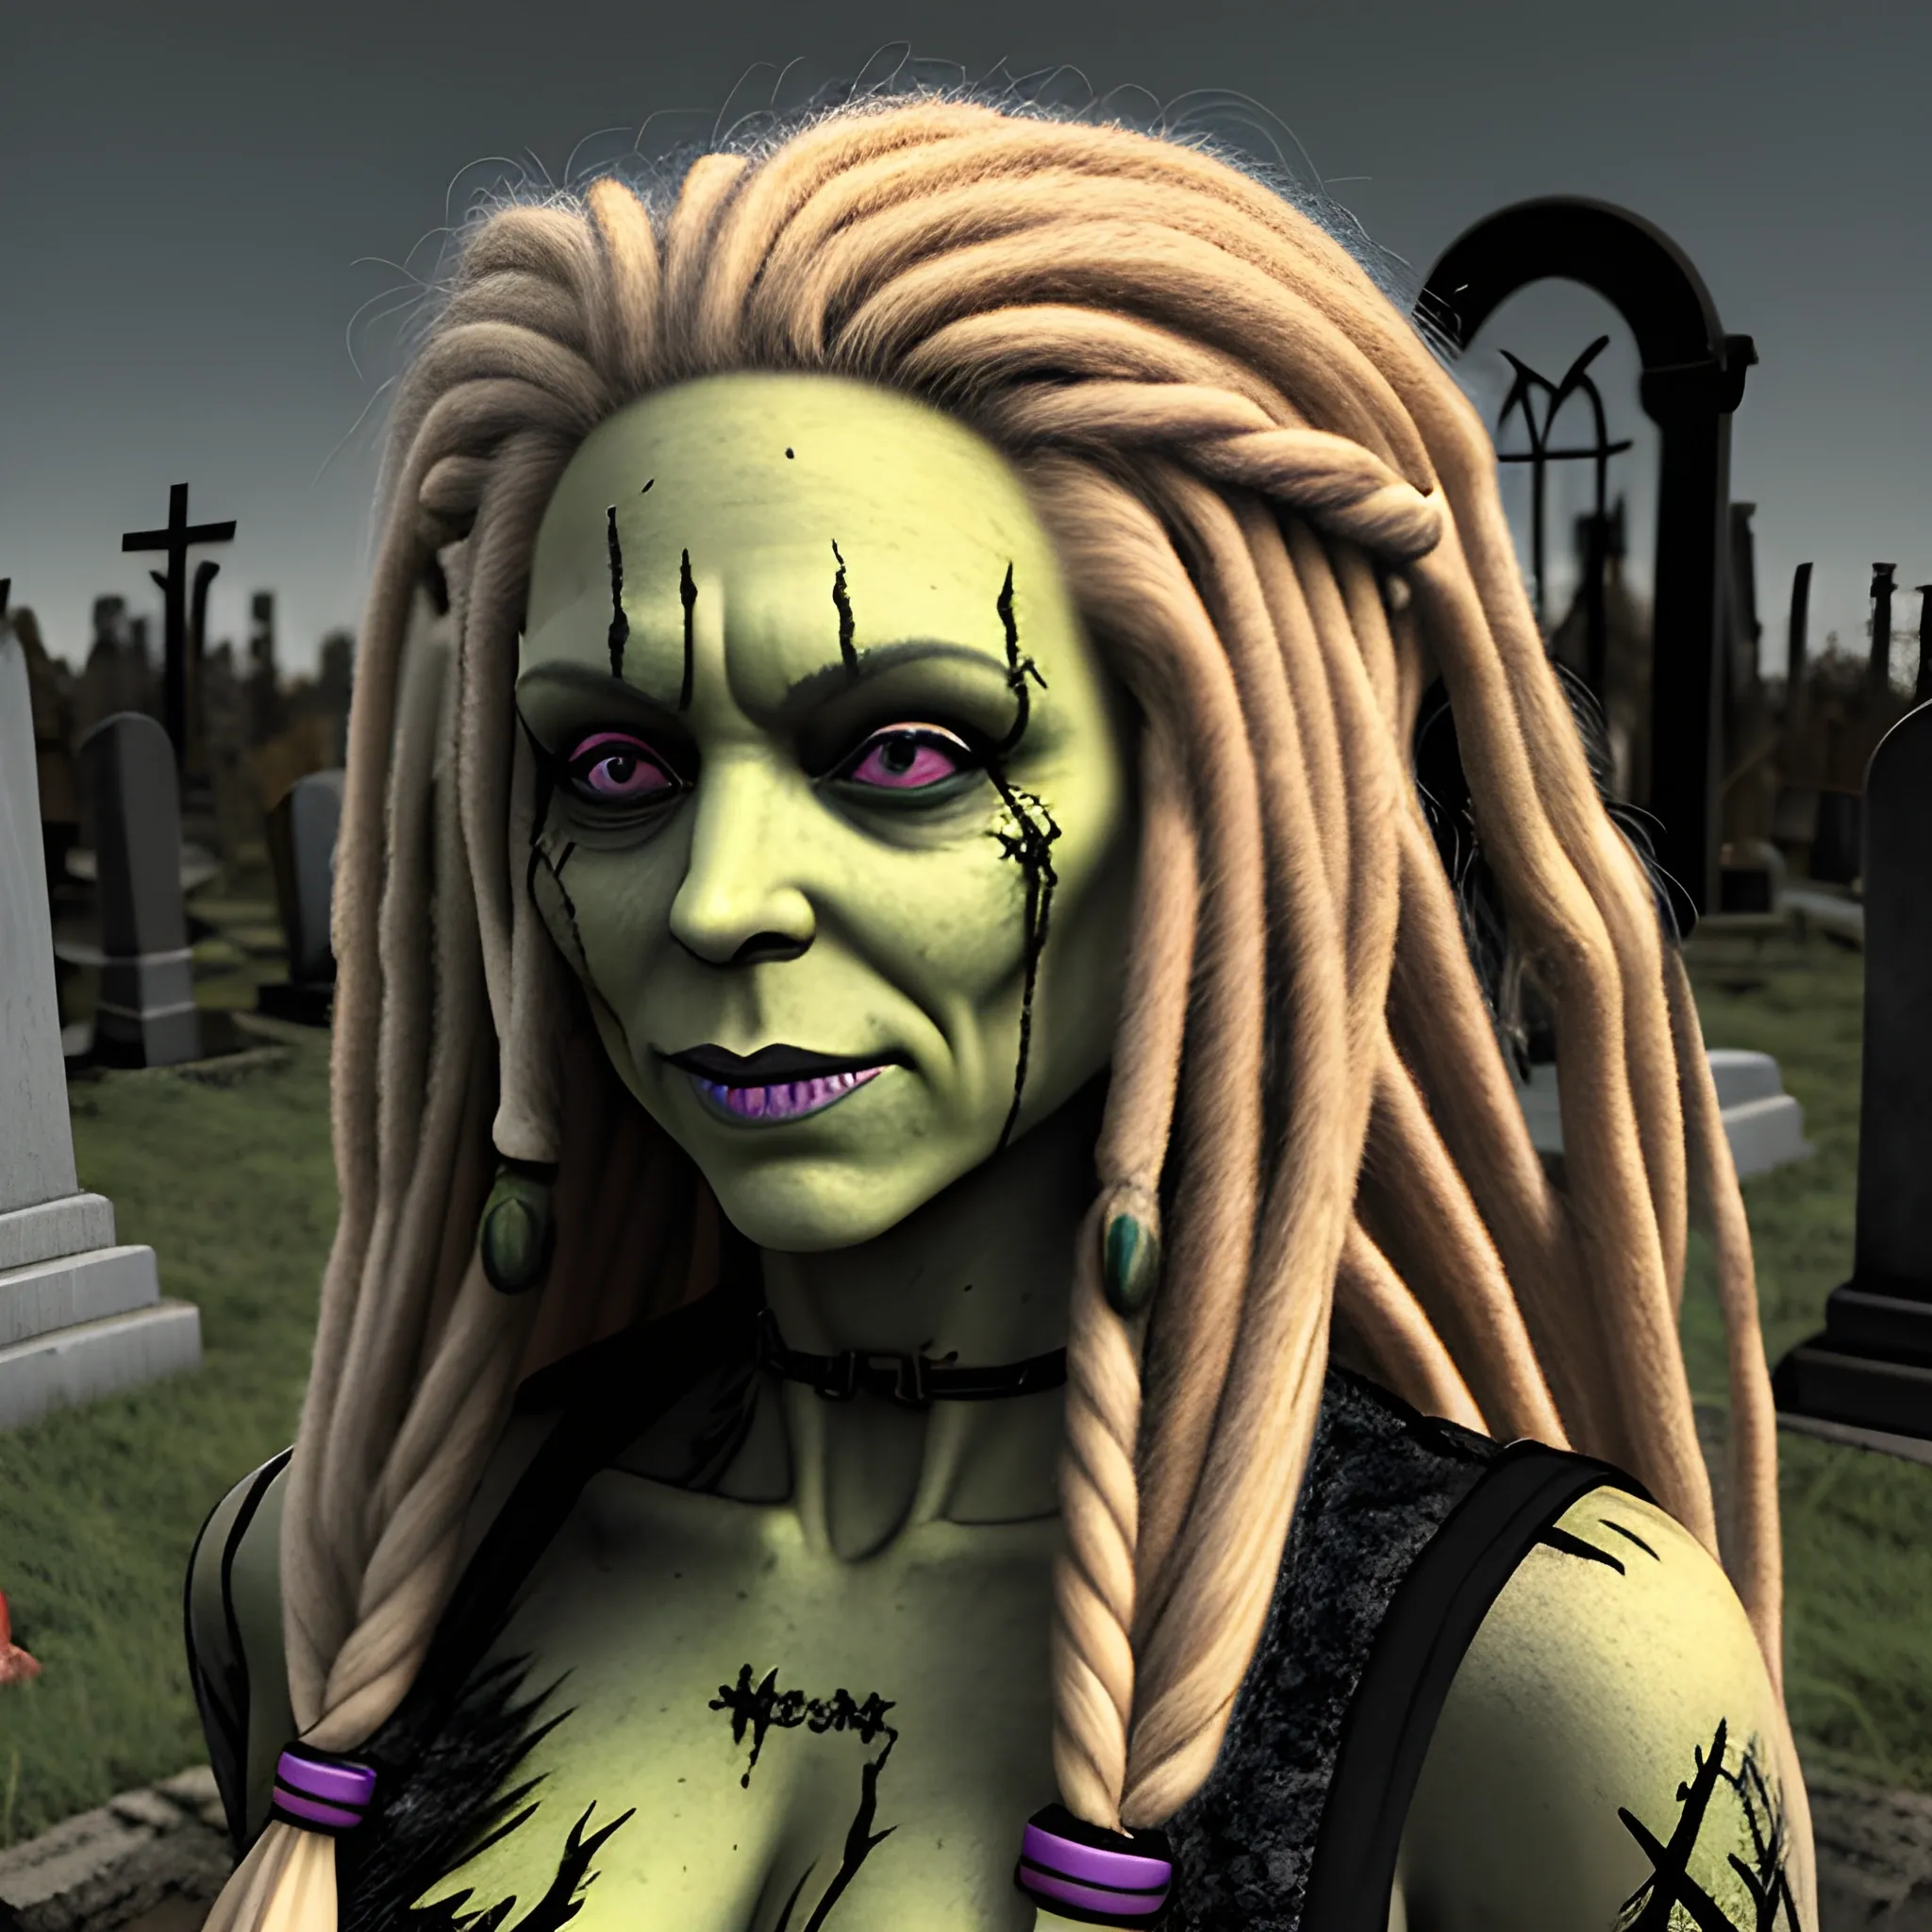 A wicked woman with long blonde dreadlocks in an apocalypse  sling someone's throat in a grave yard, 3D